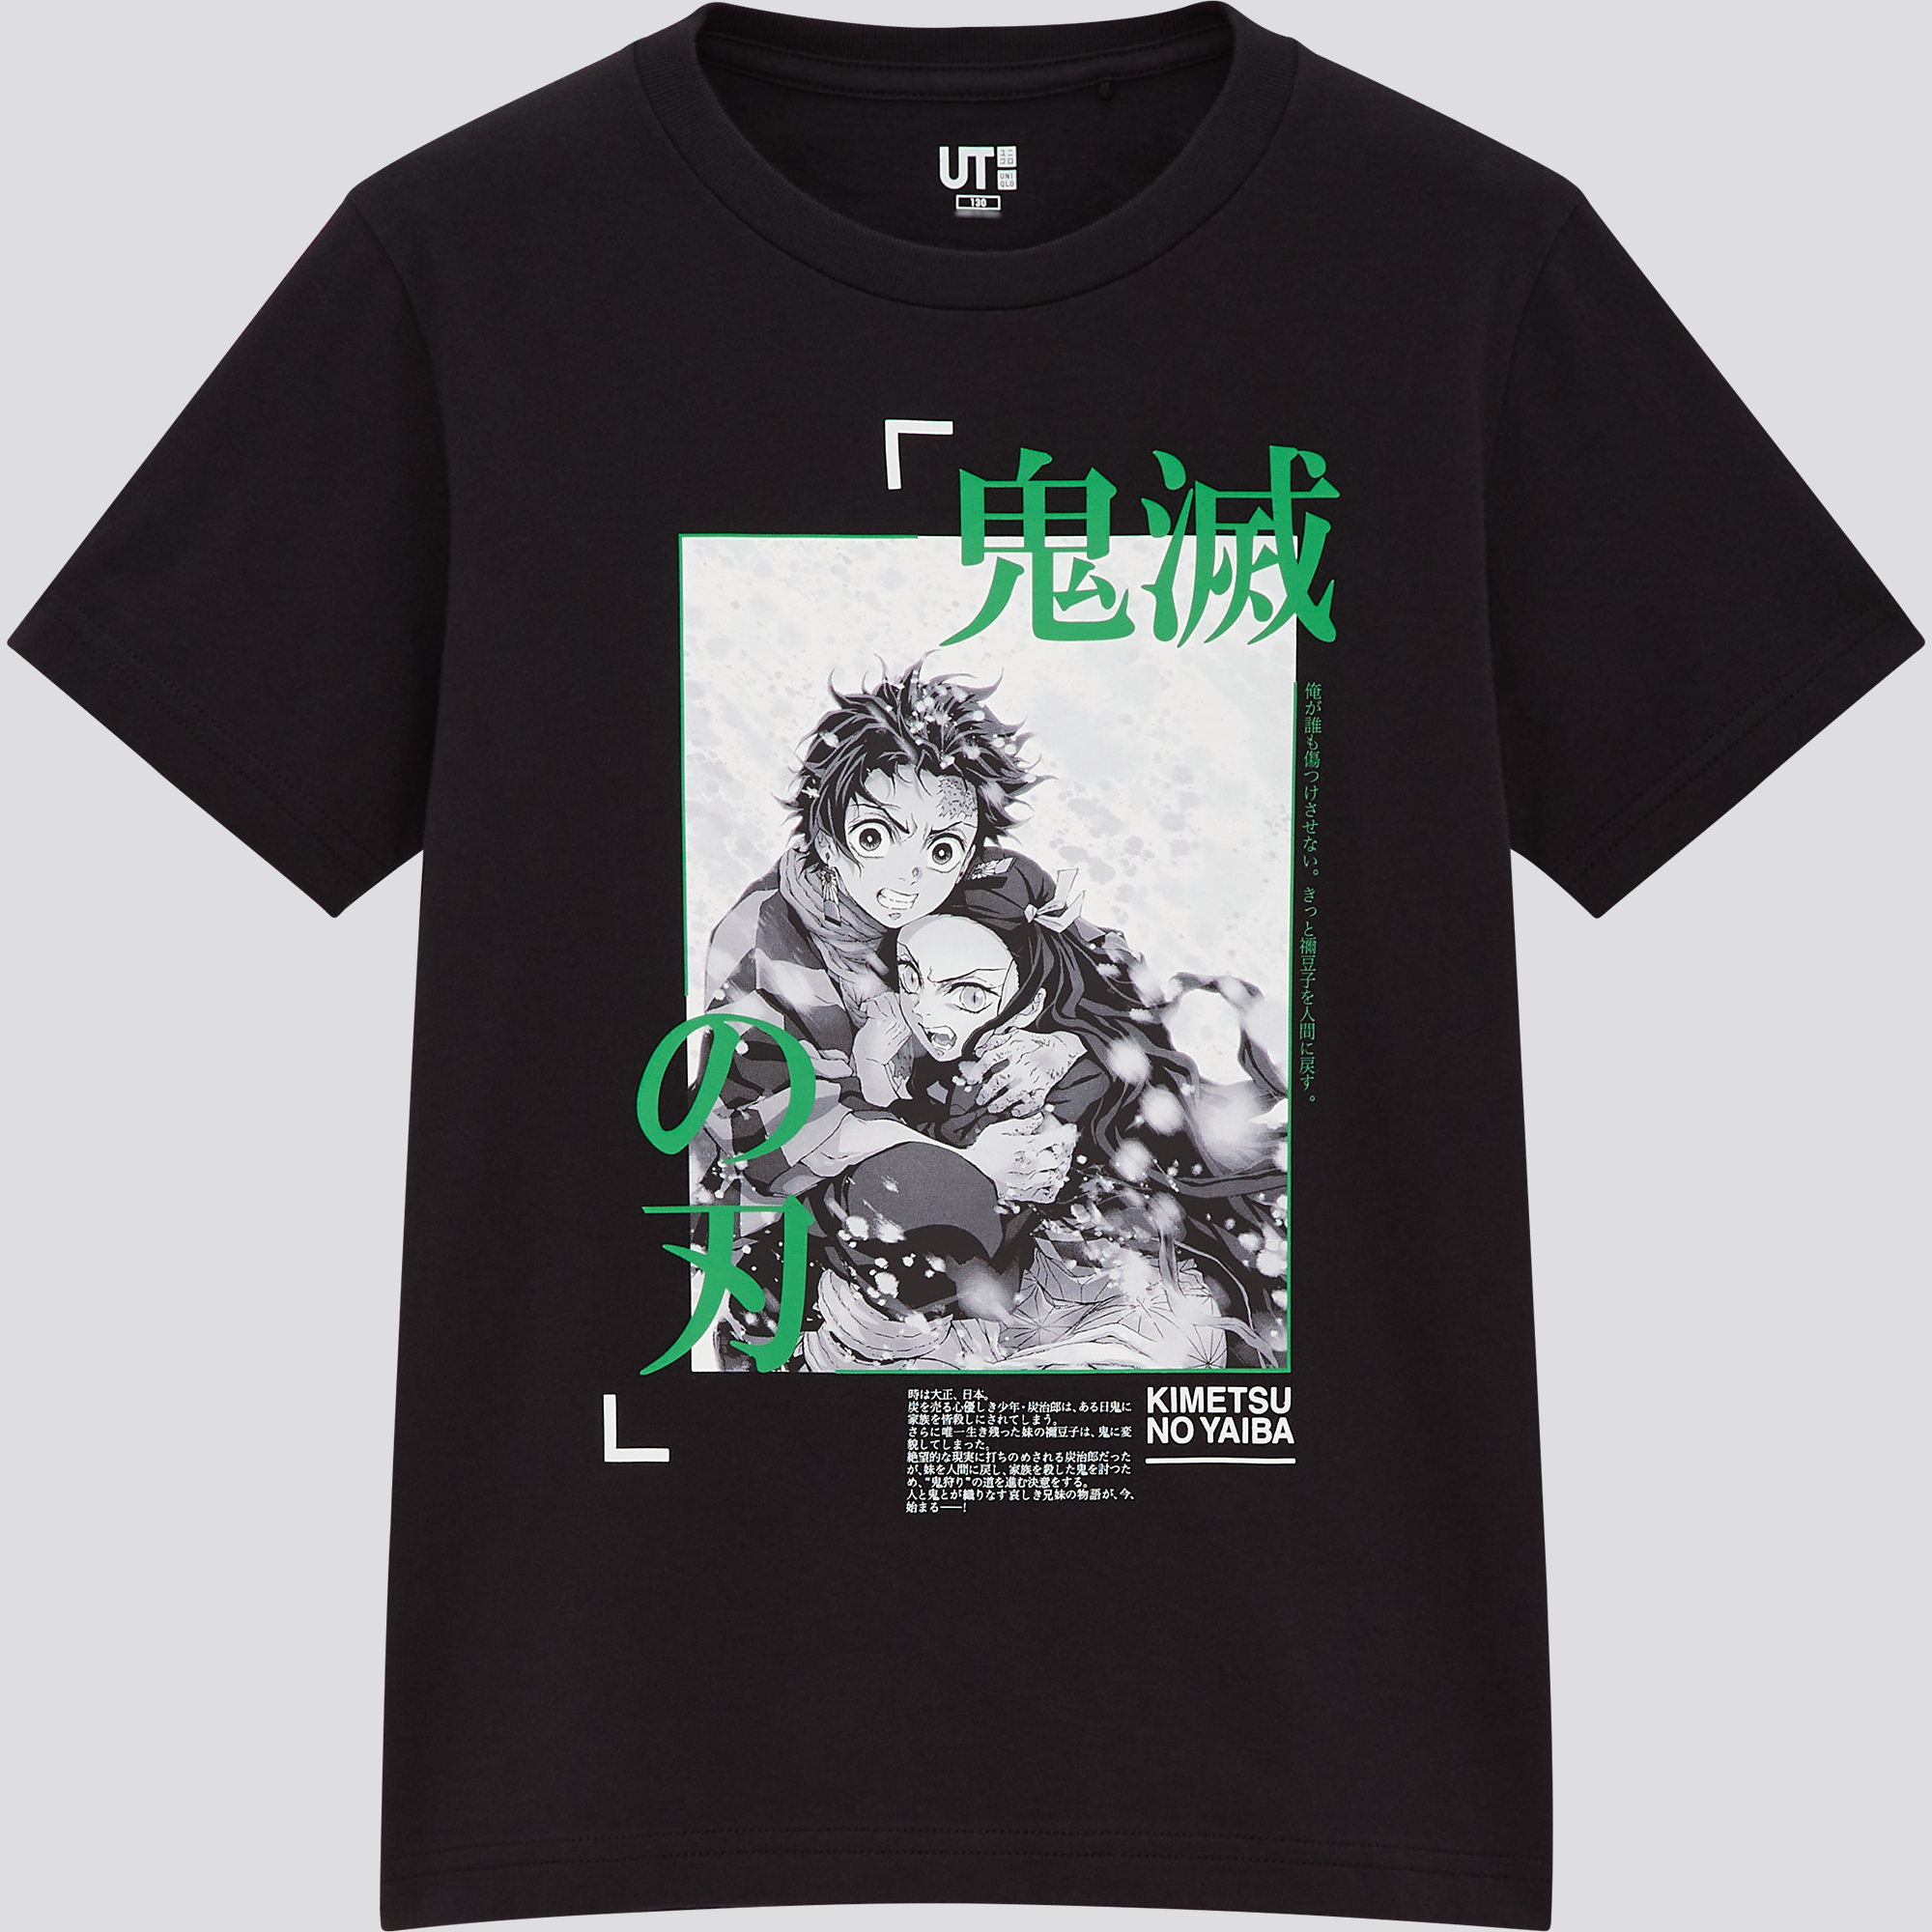 Uniqlo S'pore to release 2nd Demon Slayer collection in Oct. 2020 ...